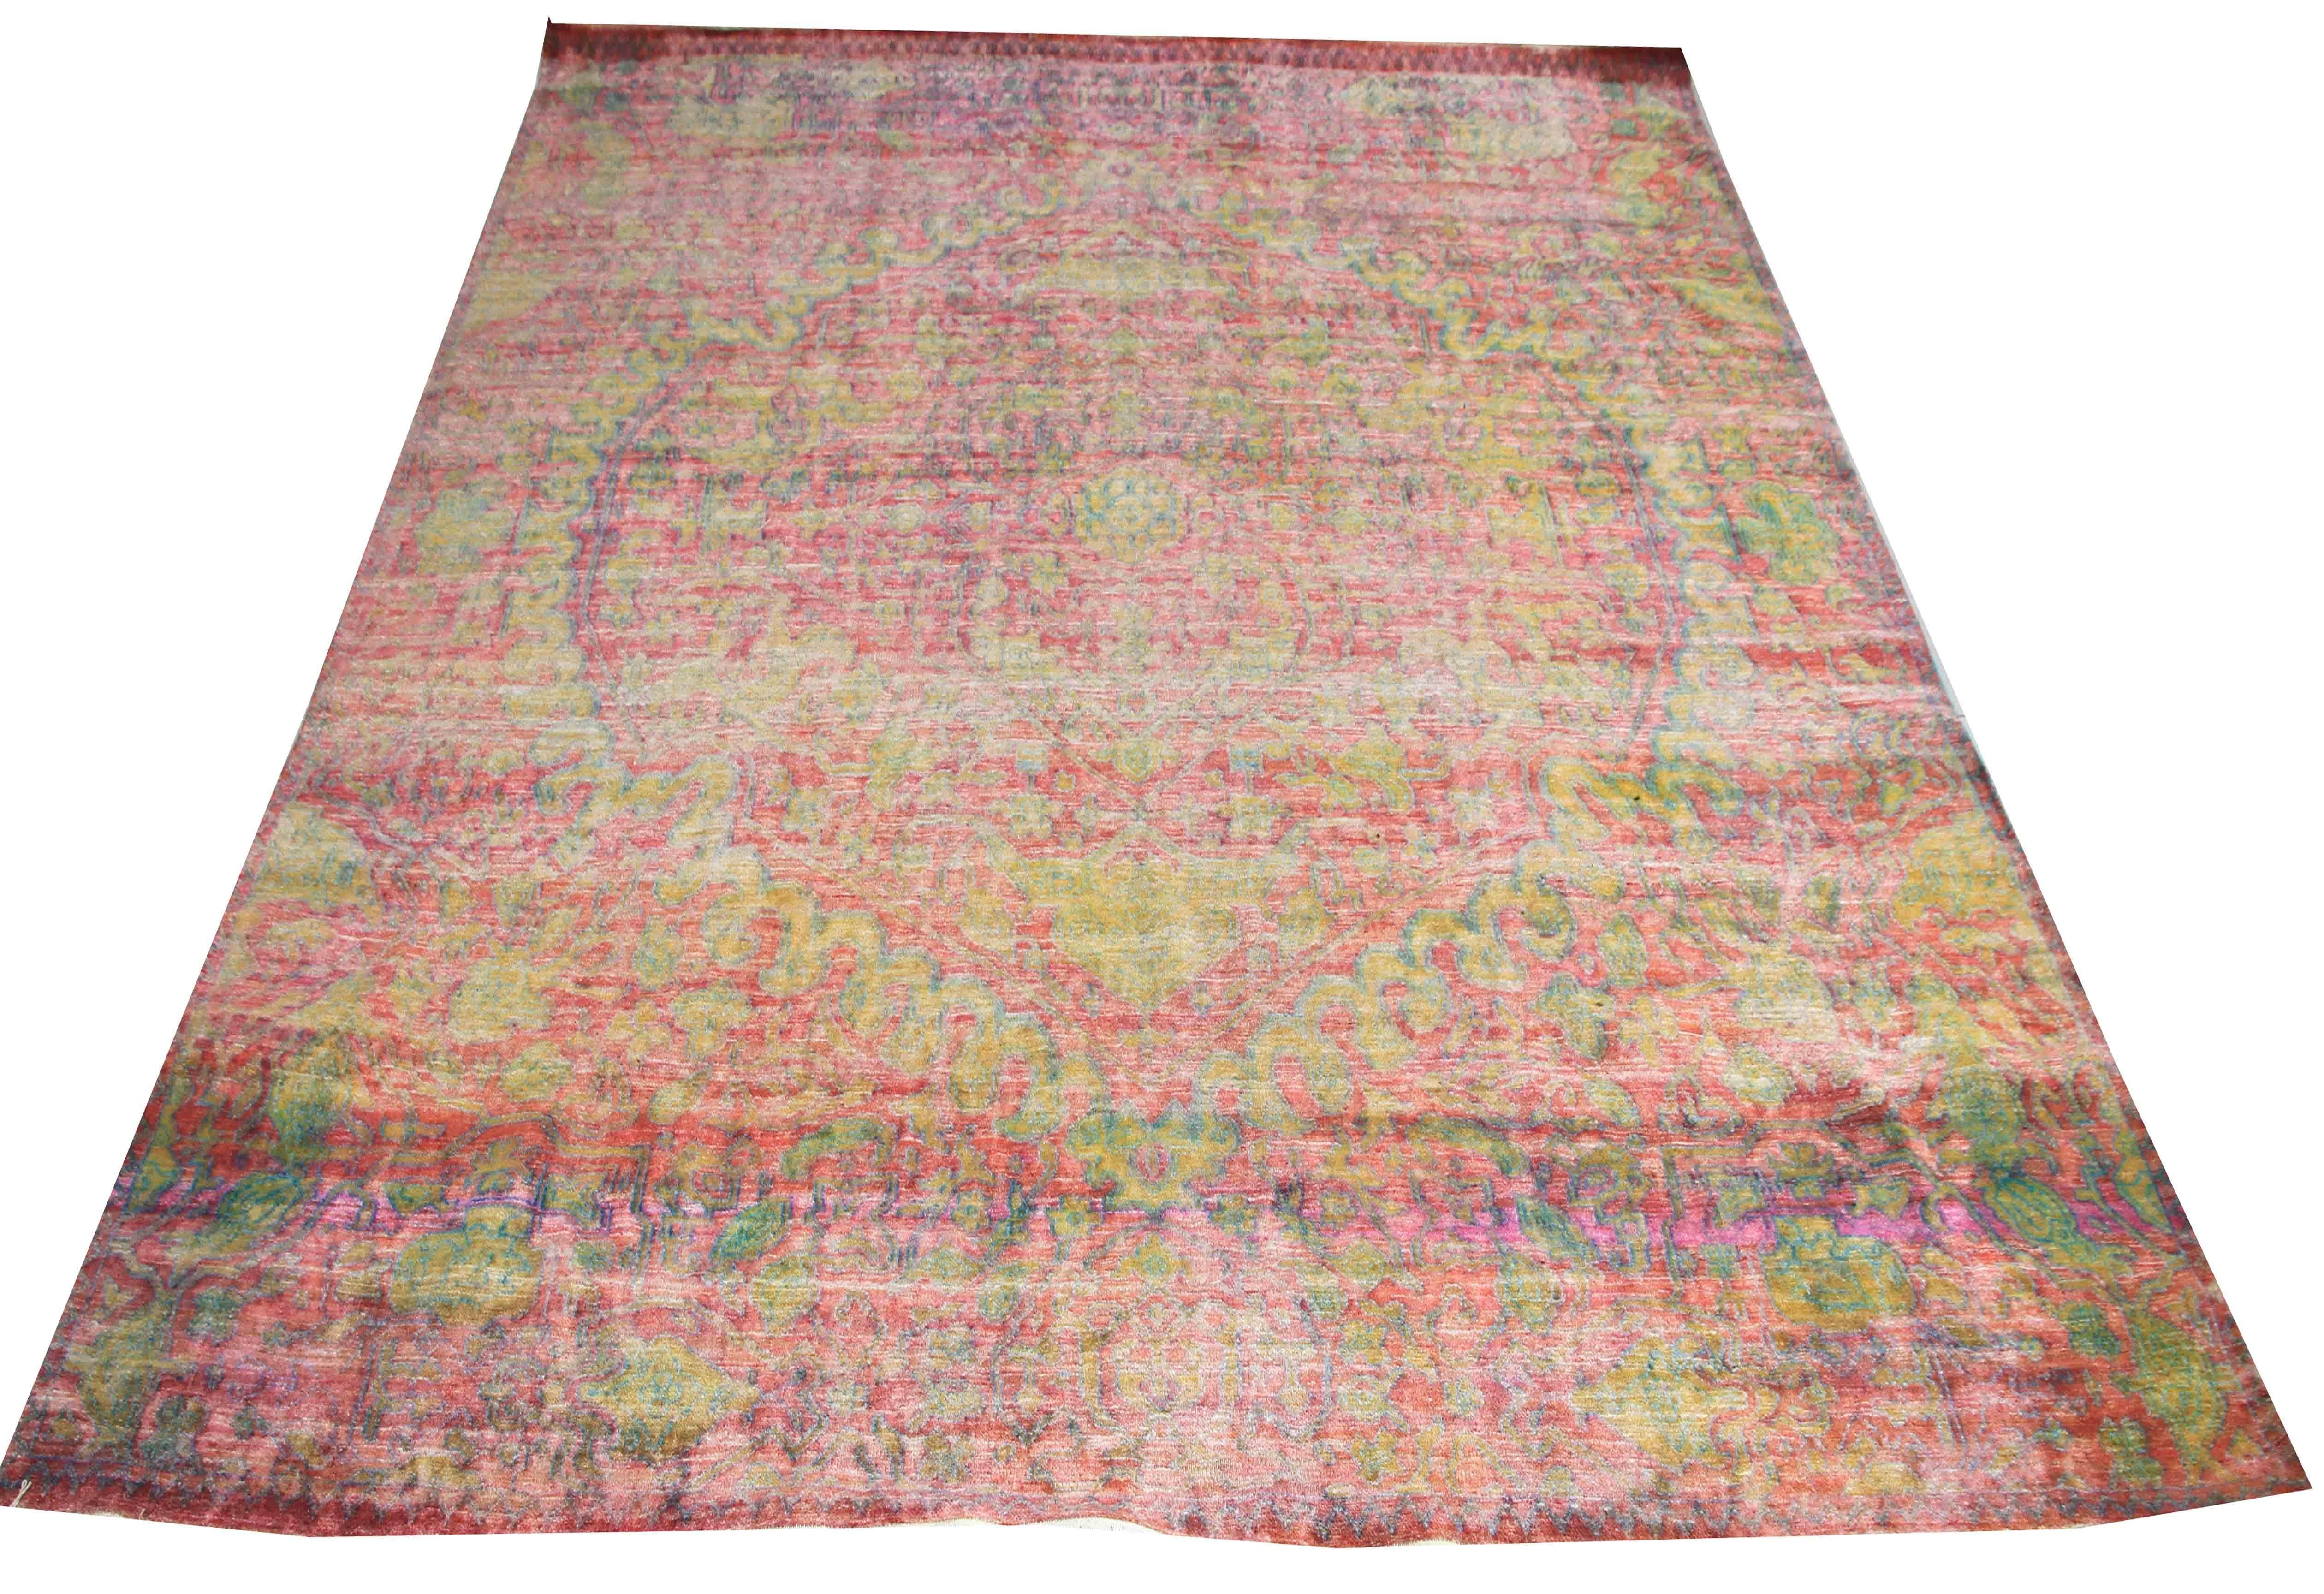 Handmade in Jaipur, India from a raw blend of wool linen & Silk, this Khotan rug dazzles the senses with pink & yellow. Every pattern is unique, drawing inspiration from different eras as far back as ancient textiles are interwoven with mid-century